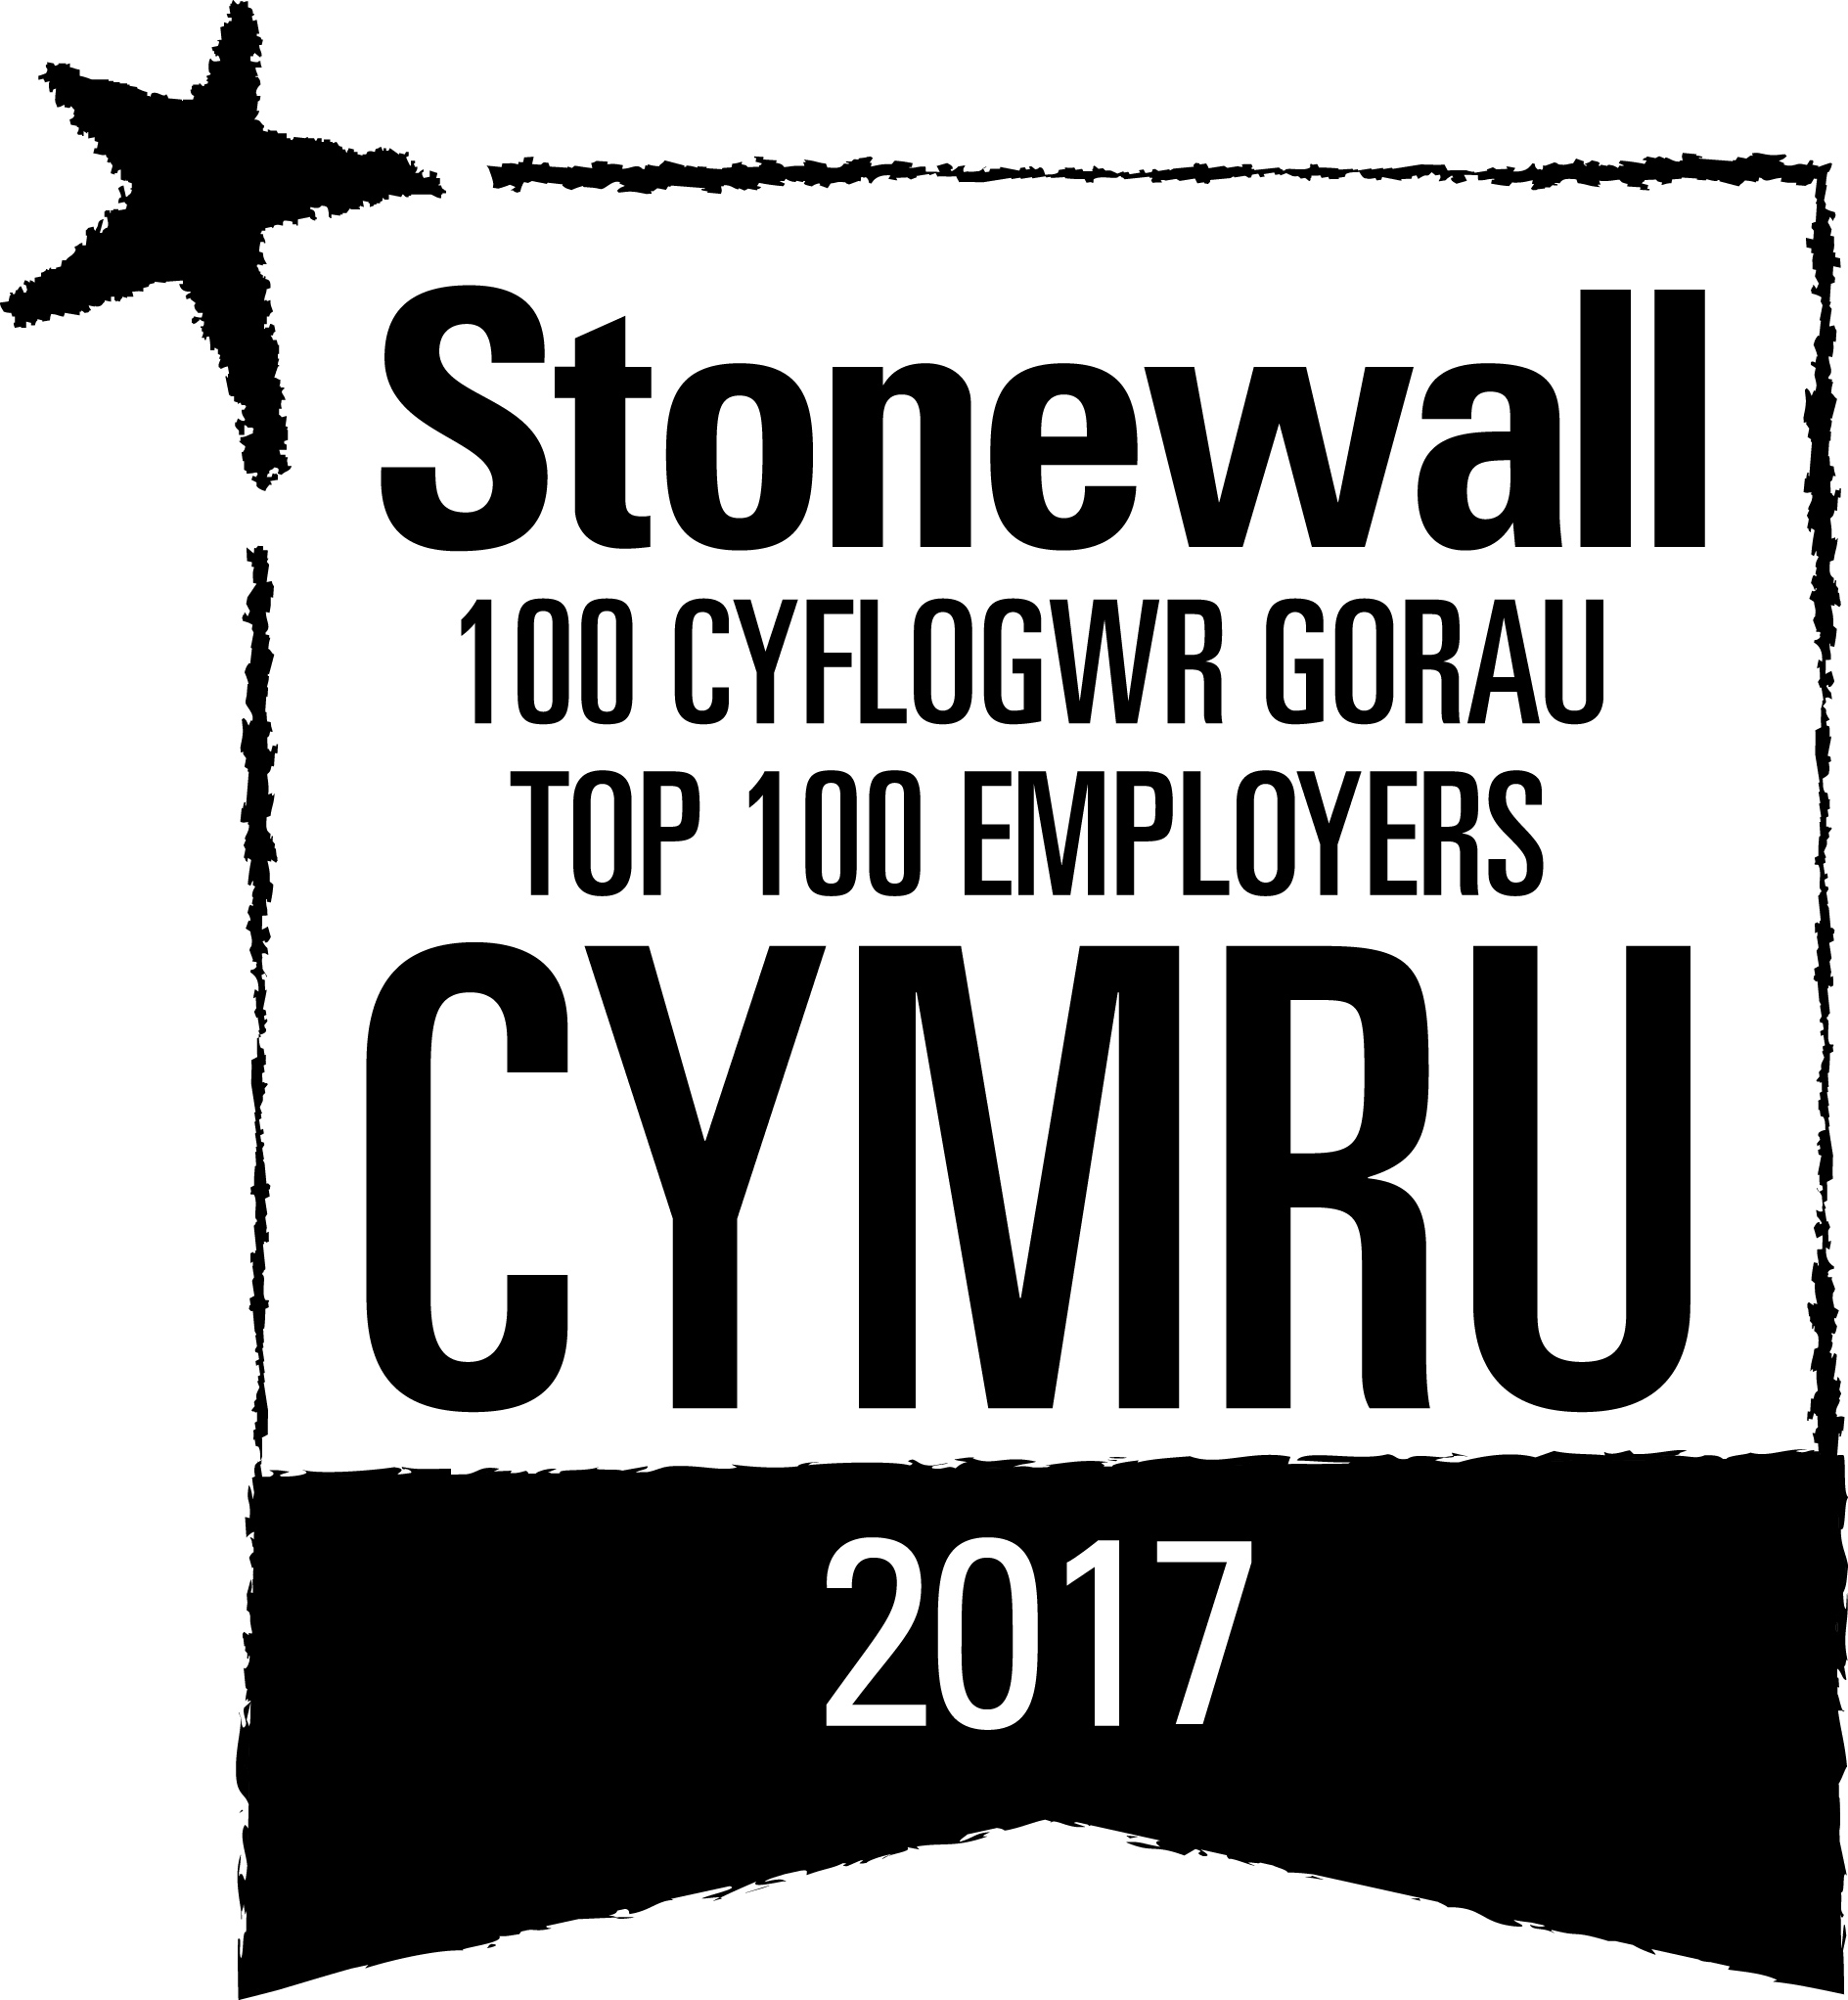 logo for Stonewall's Top 100 employers 2017